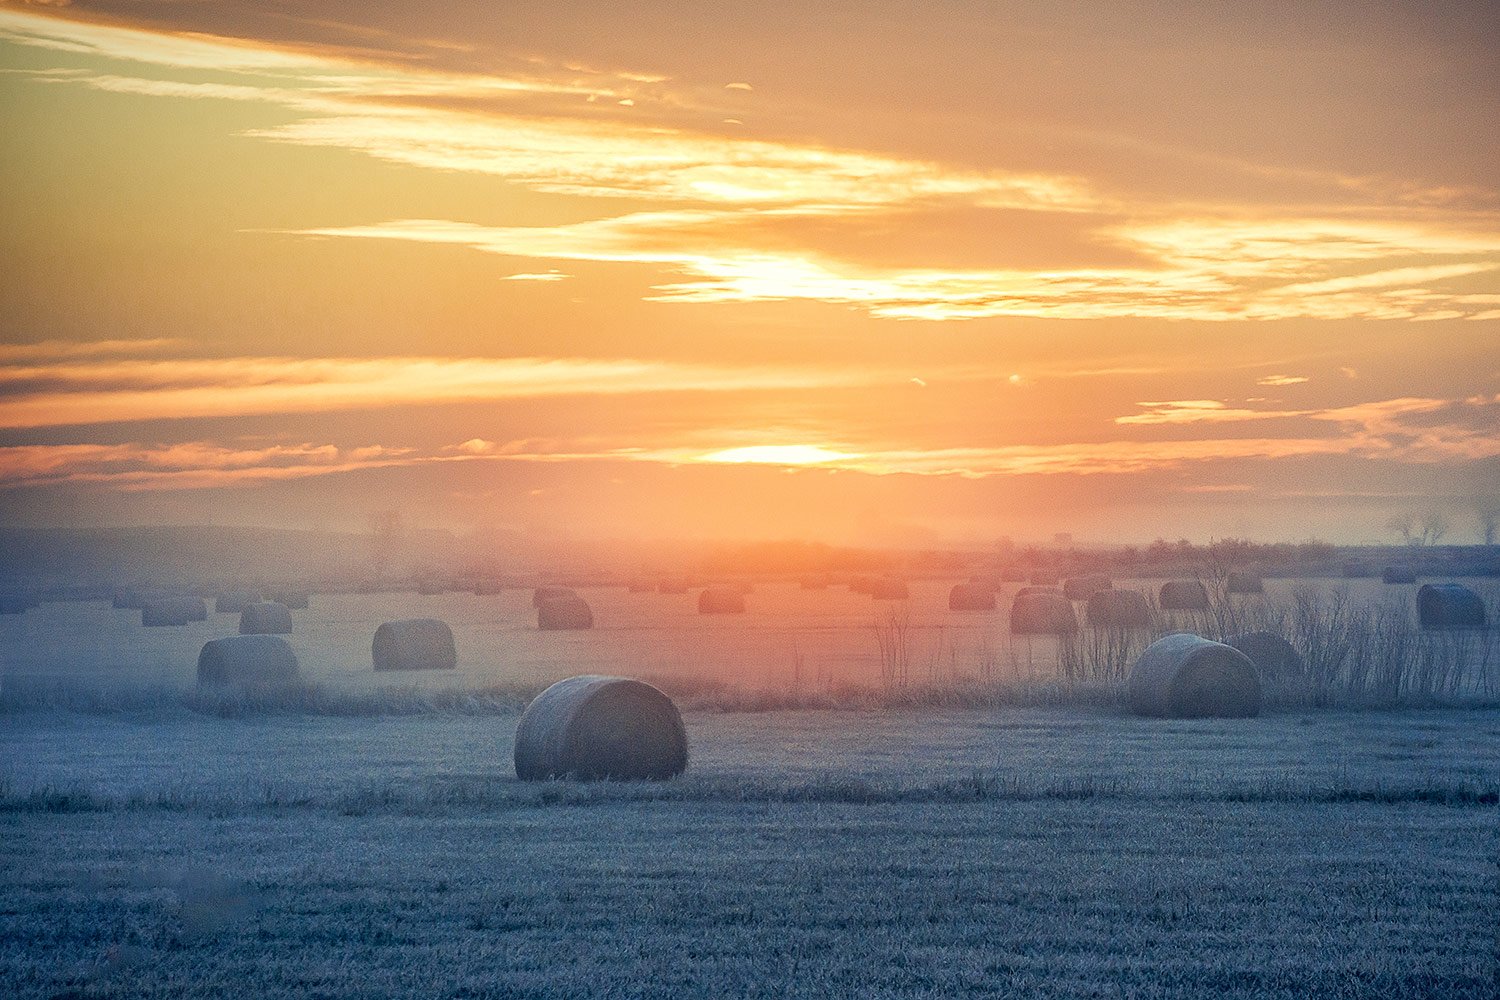 Bales in the Mist